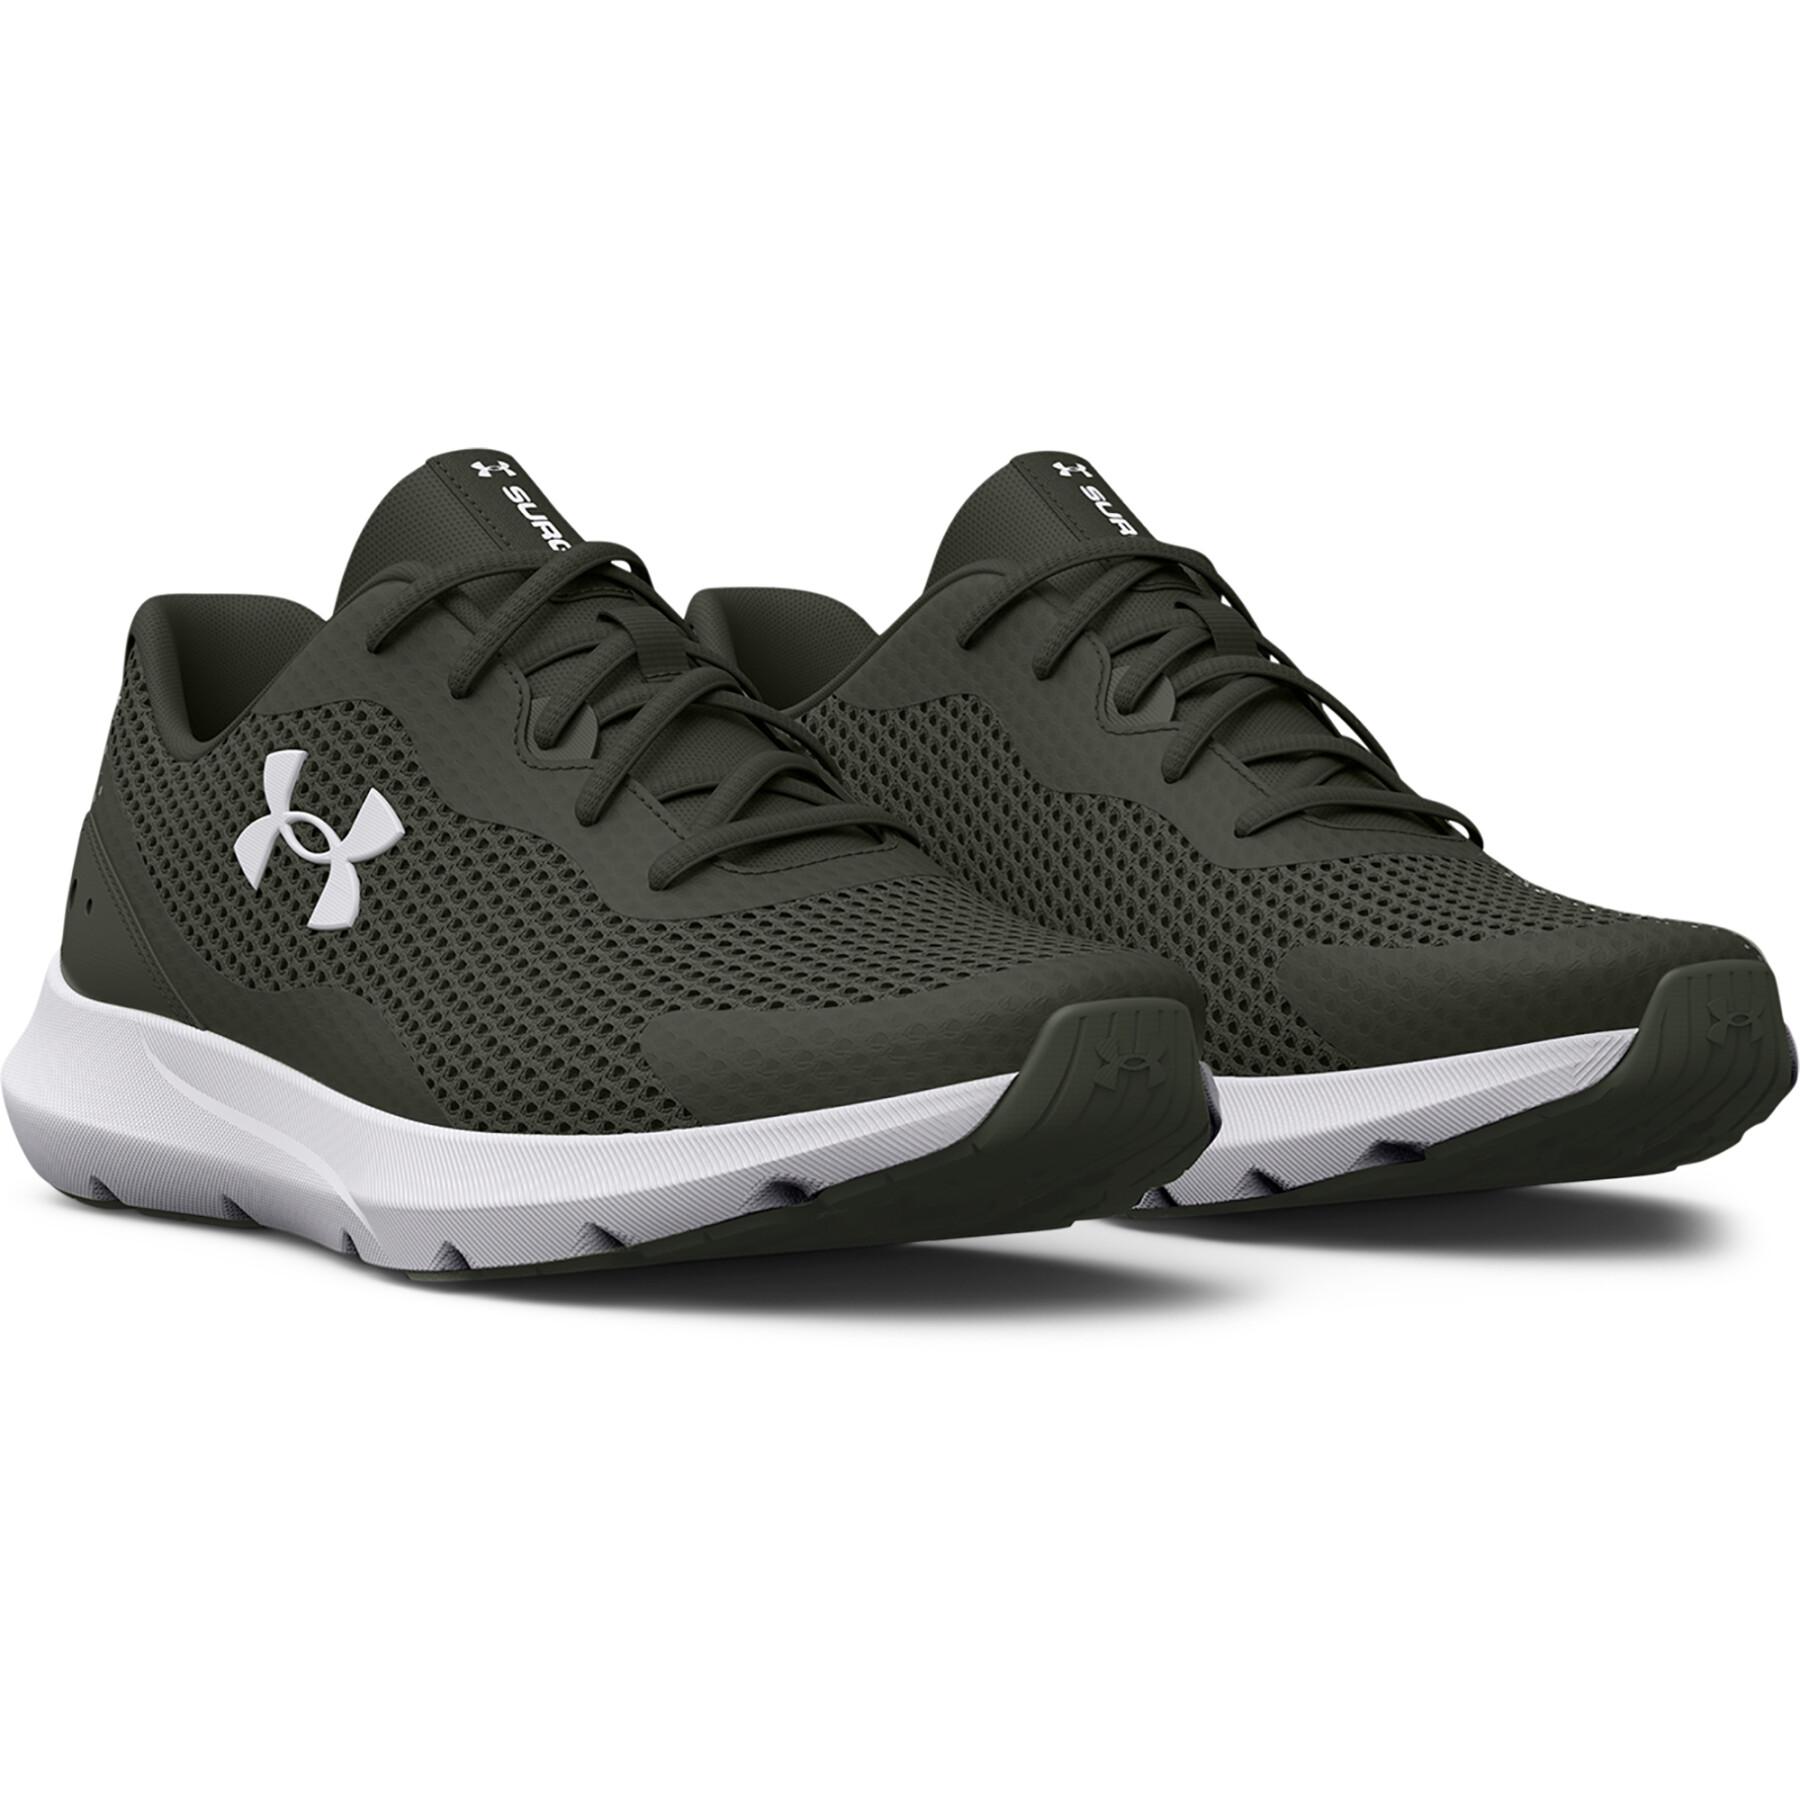 Running shoes Under Armour Surge 3